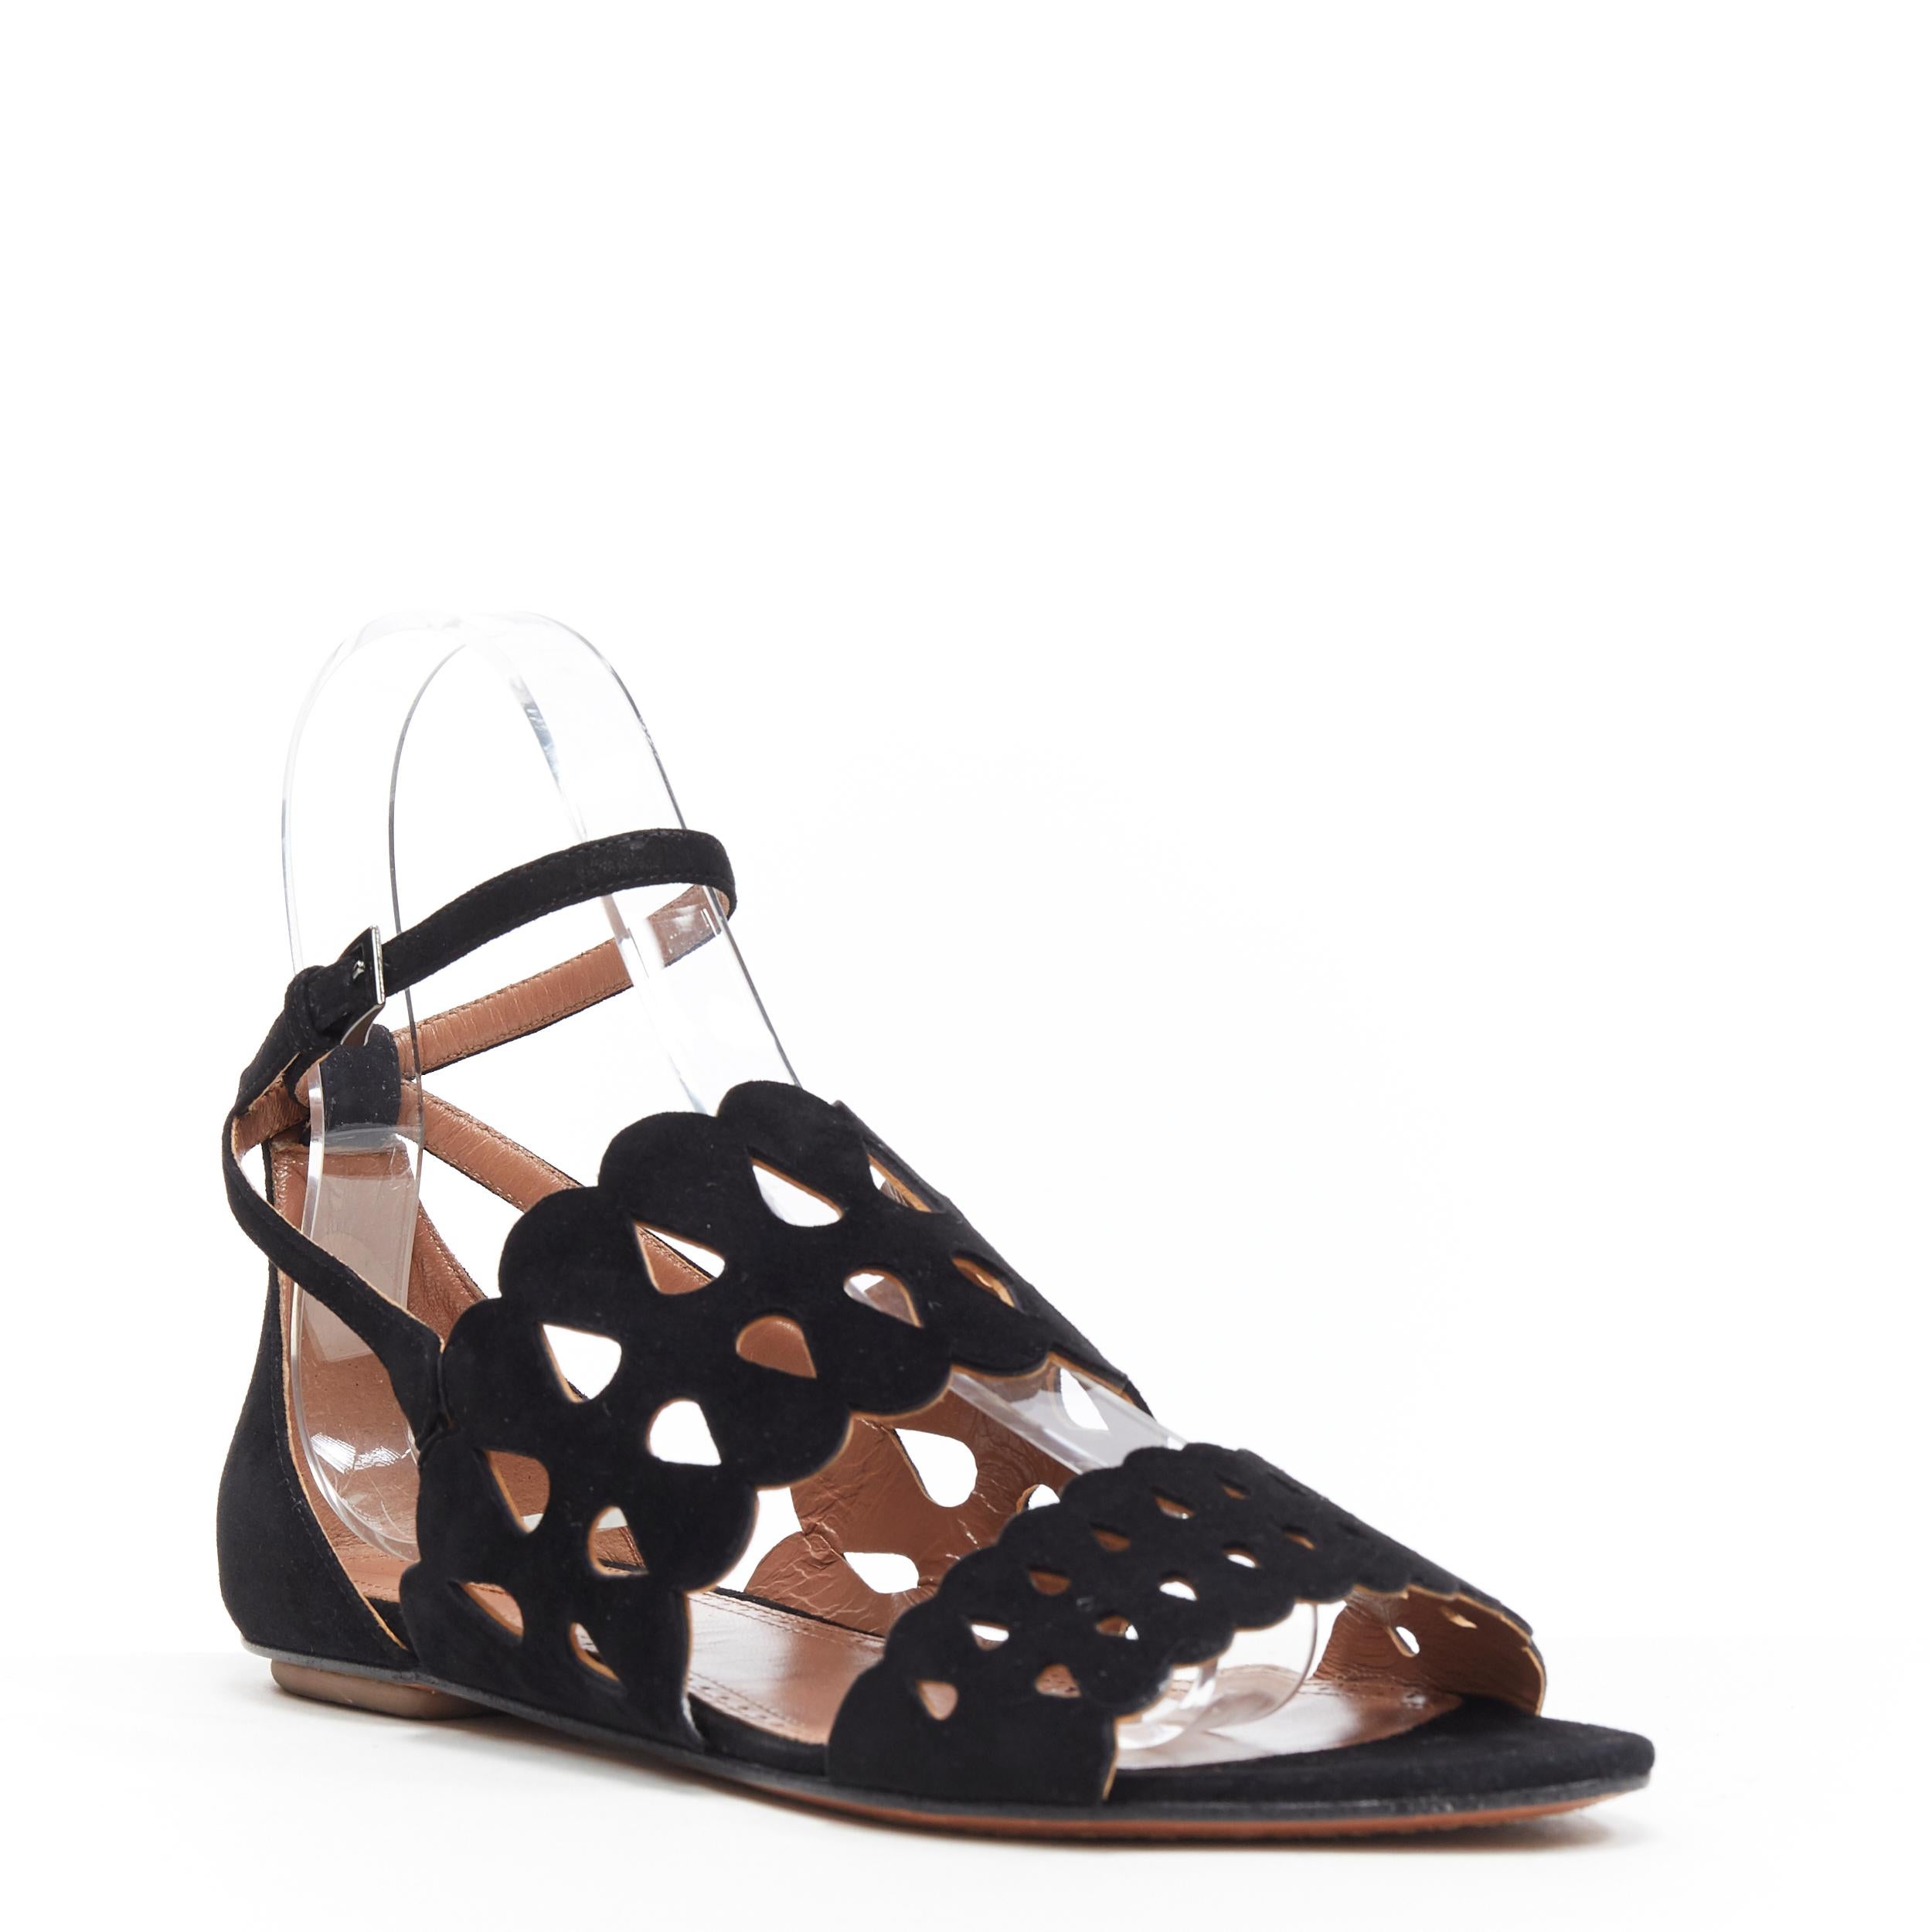 ALAIA black suede squiggly cut out strap open toe ankle wrap flat sandals EU37
Brand: Alaia
Designer: Azzedine Alaia
Model Name / Style: Suede sandals
Material: Suede
Color: Black
Pattern: Solid
Closure: Ankle strap
Lining material: Leather
Extra